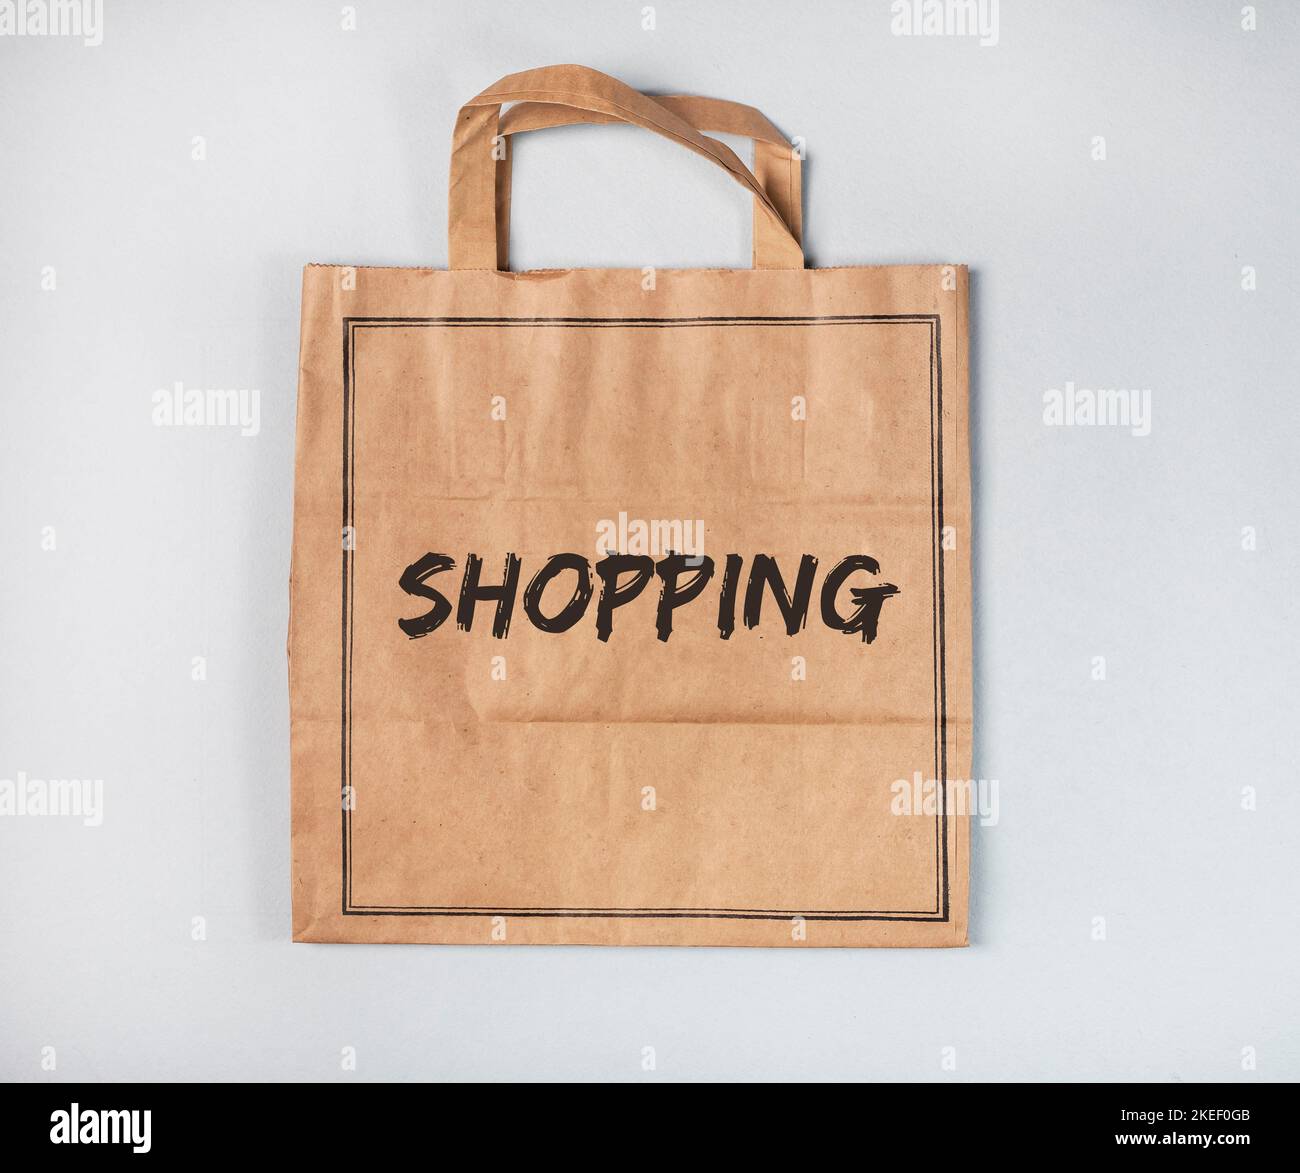 Shopping word on craft paper bag, empty package. Stock Photo